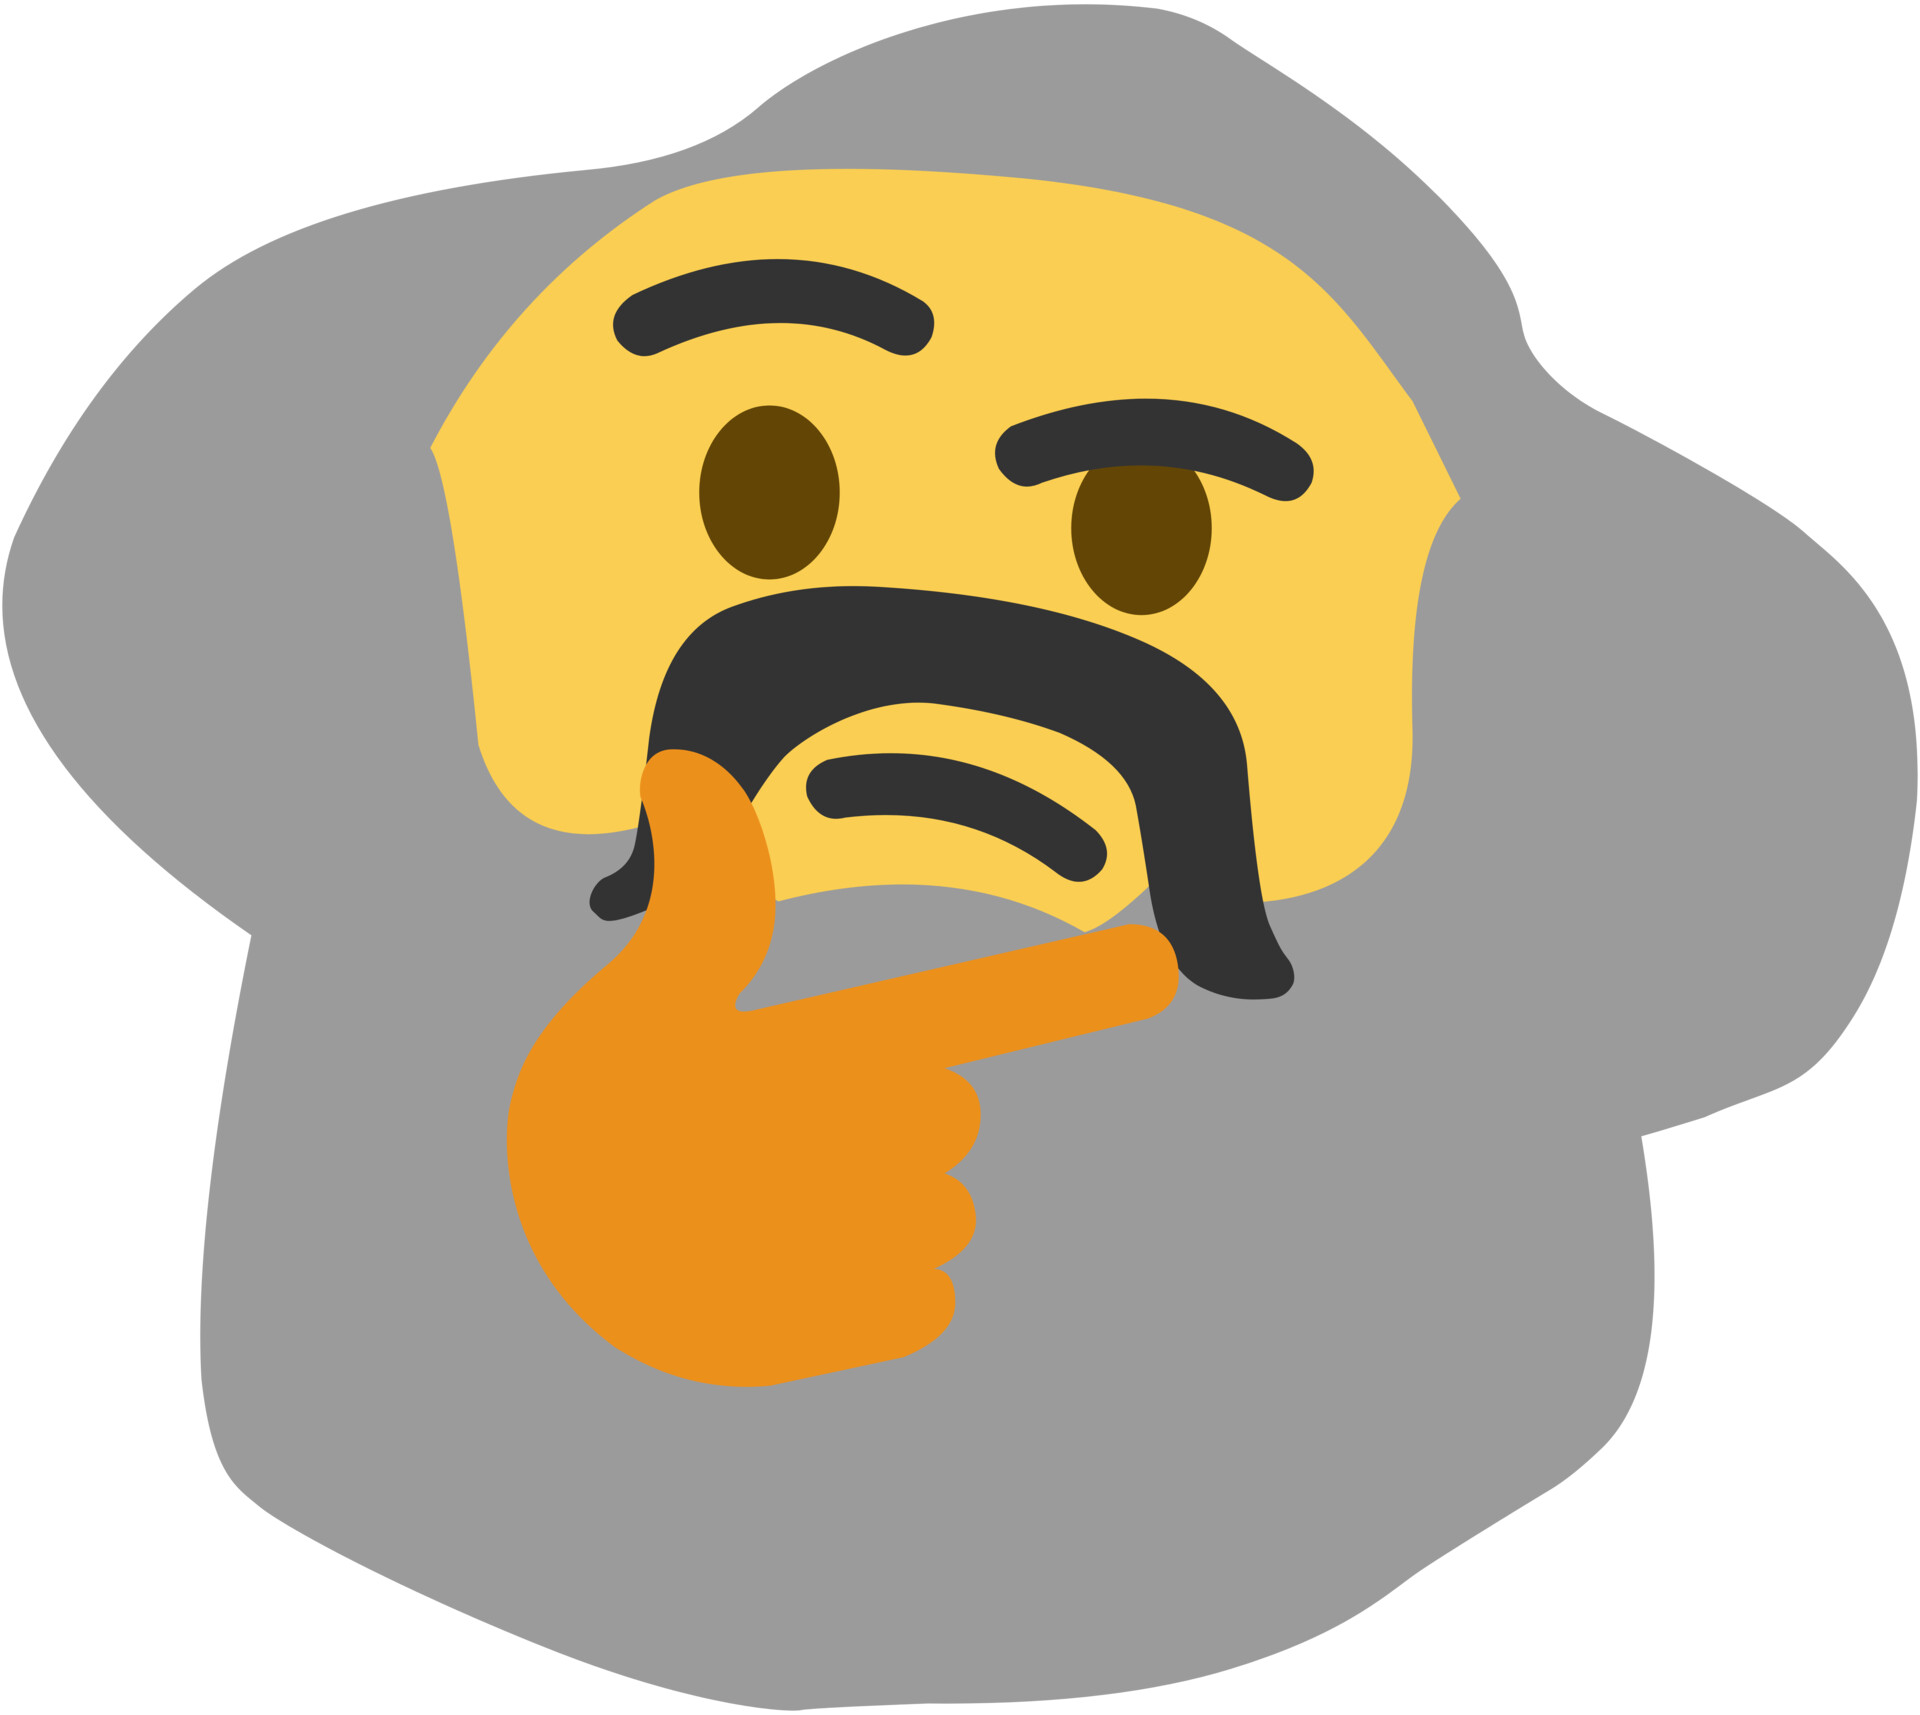 The Marx emoji has become something of an online meme, which is fun! 